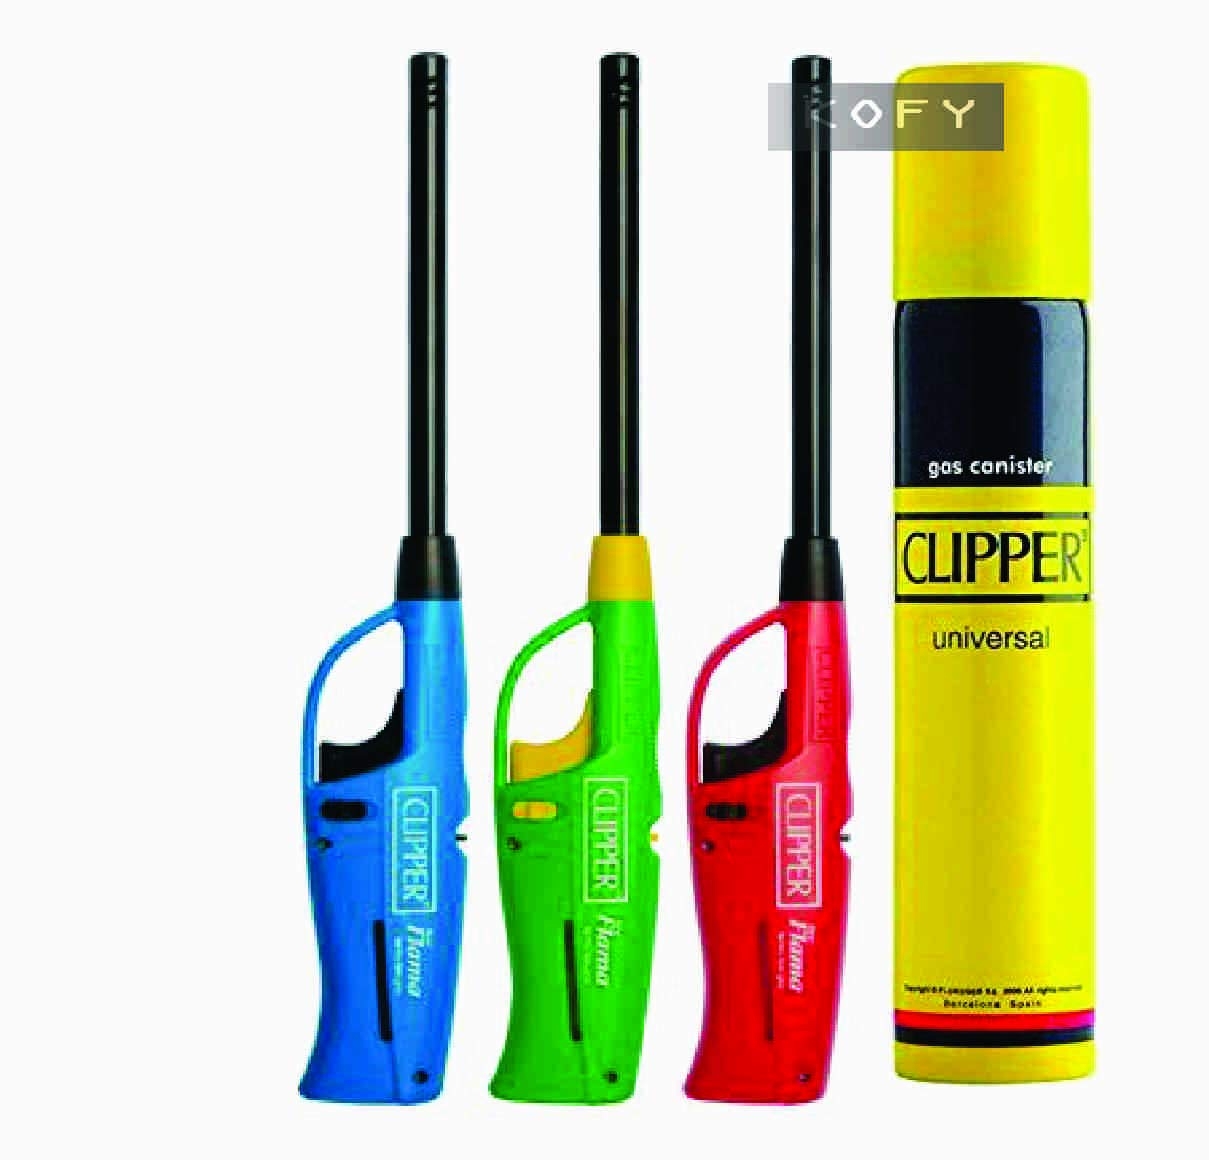 Kofy Clipper Lighter Value Set with 3 Pc Lighter and 100 Ml Gas Can Cigarette Lighter